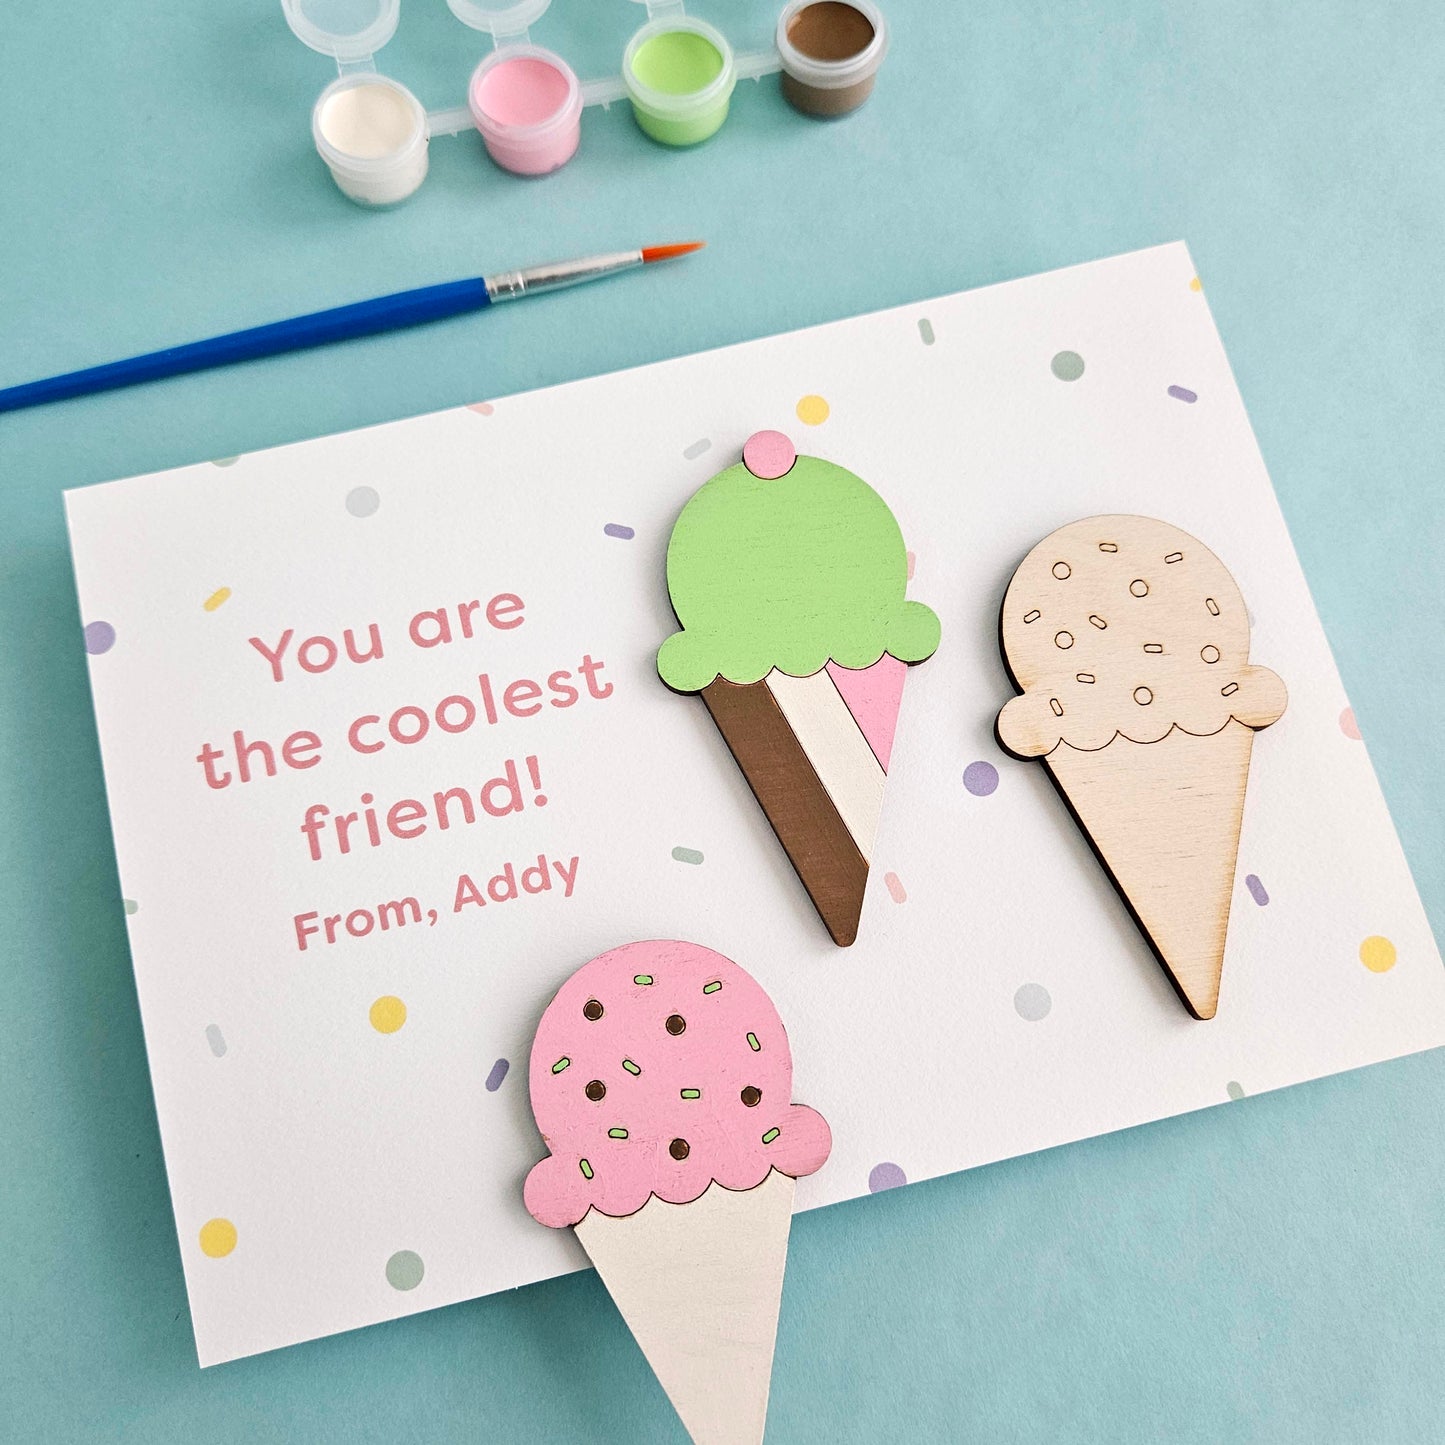 Ice Cream Party Favor, 2-piece, personalized